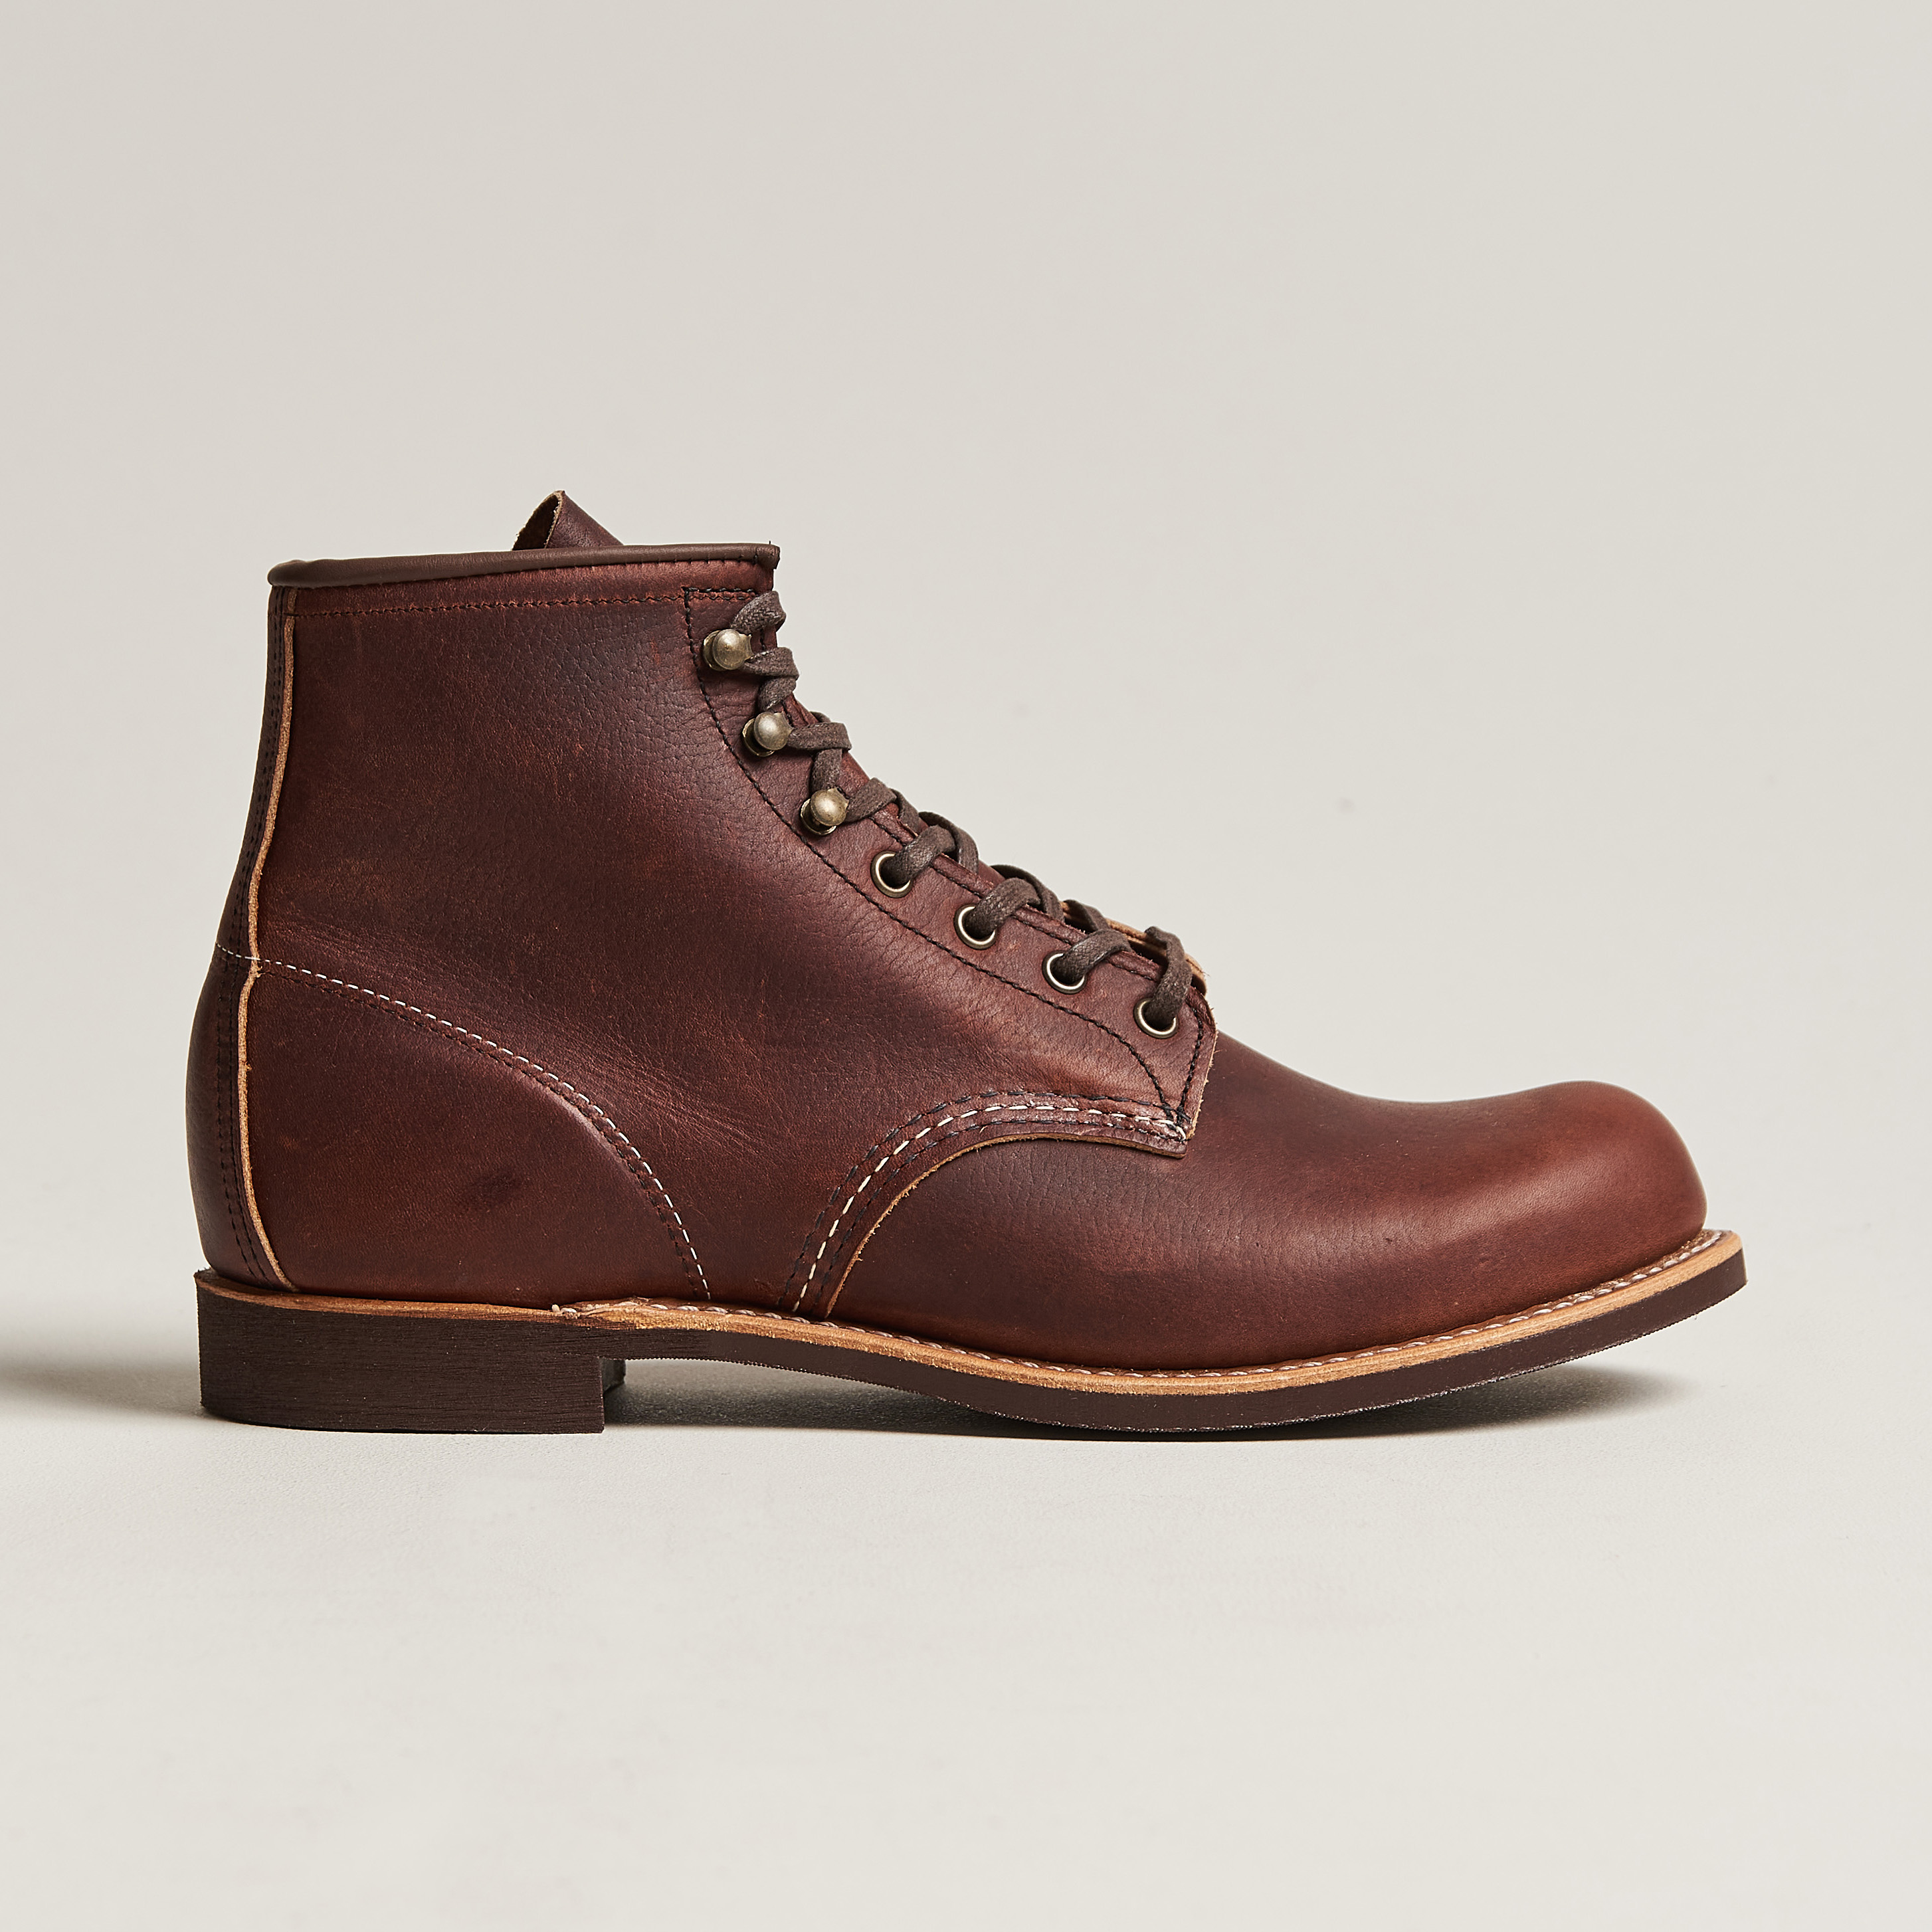 Red Wing Shoes Blacksmith Boot Briar Oil Slick Leather at CareOfCarl.com